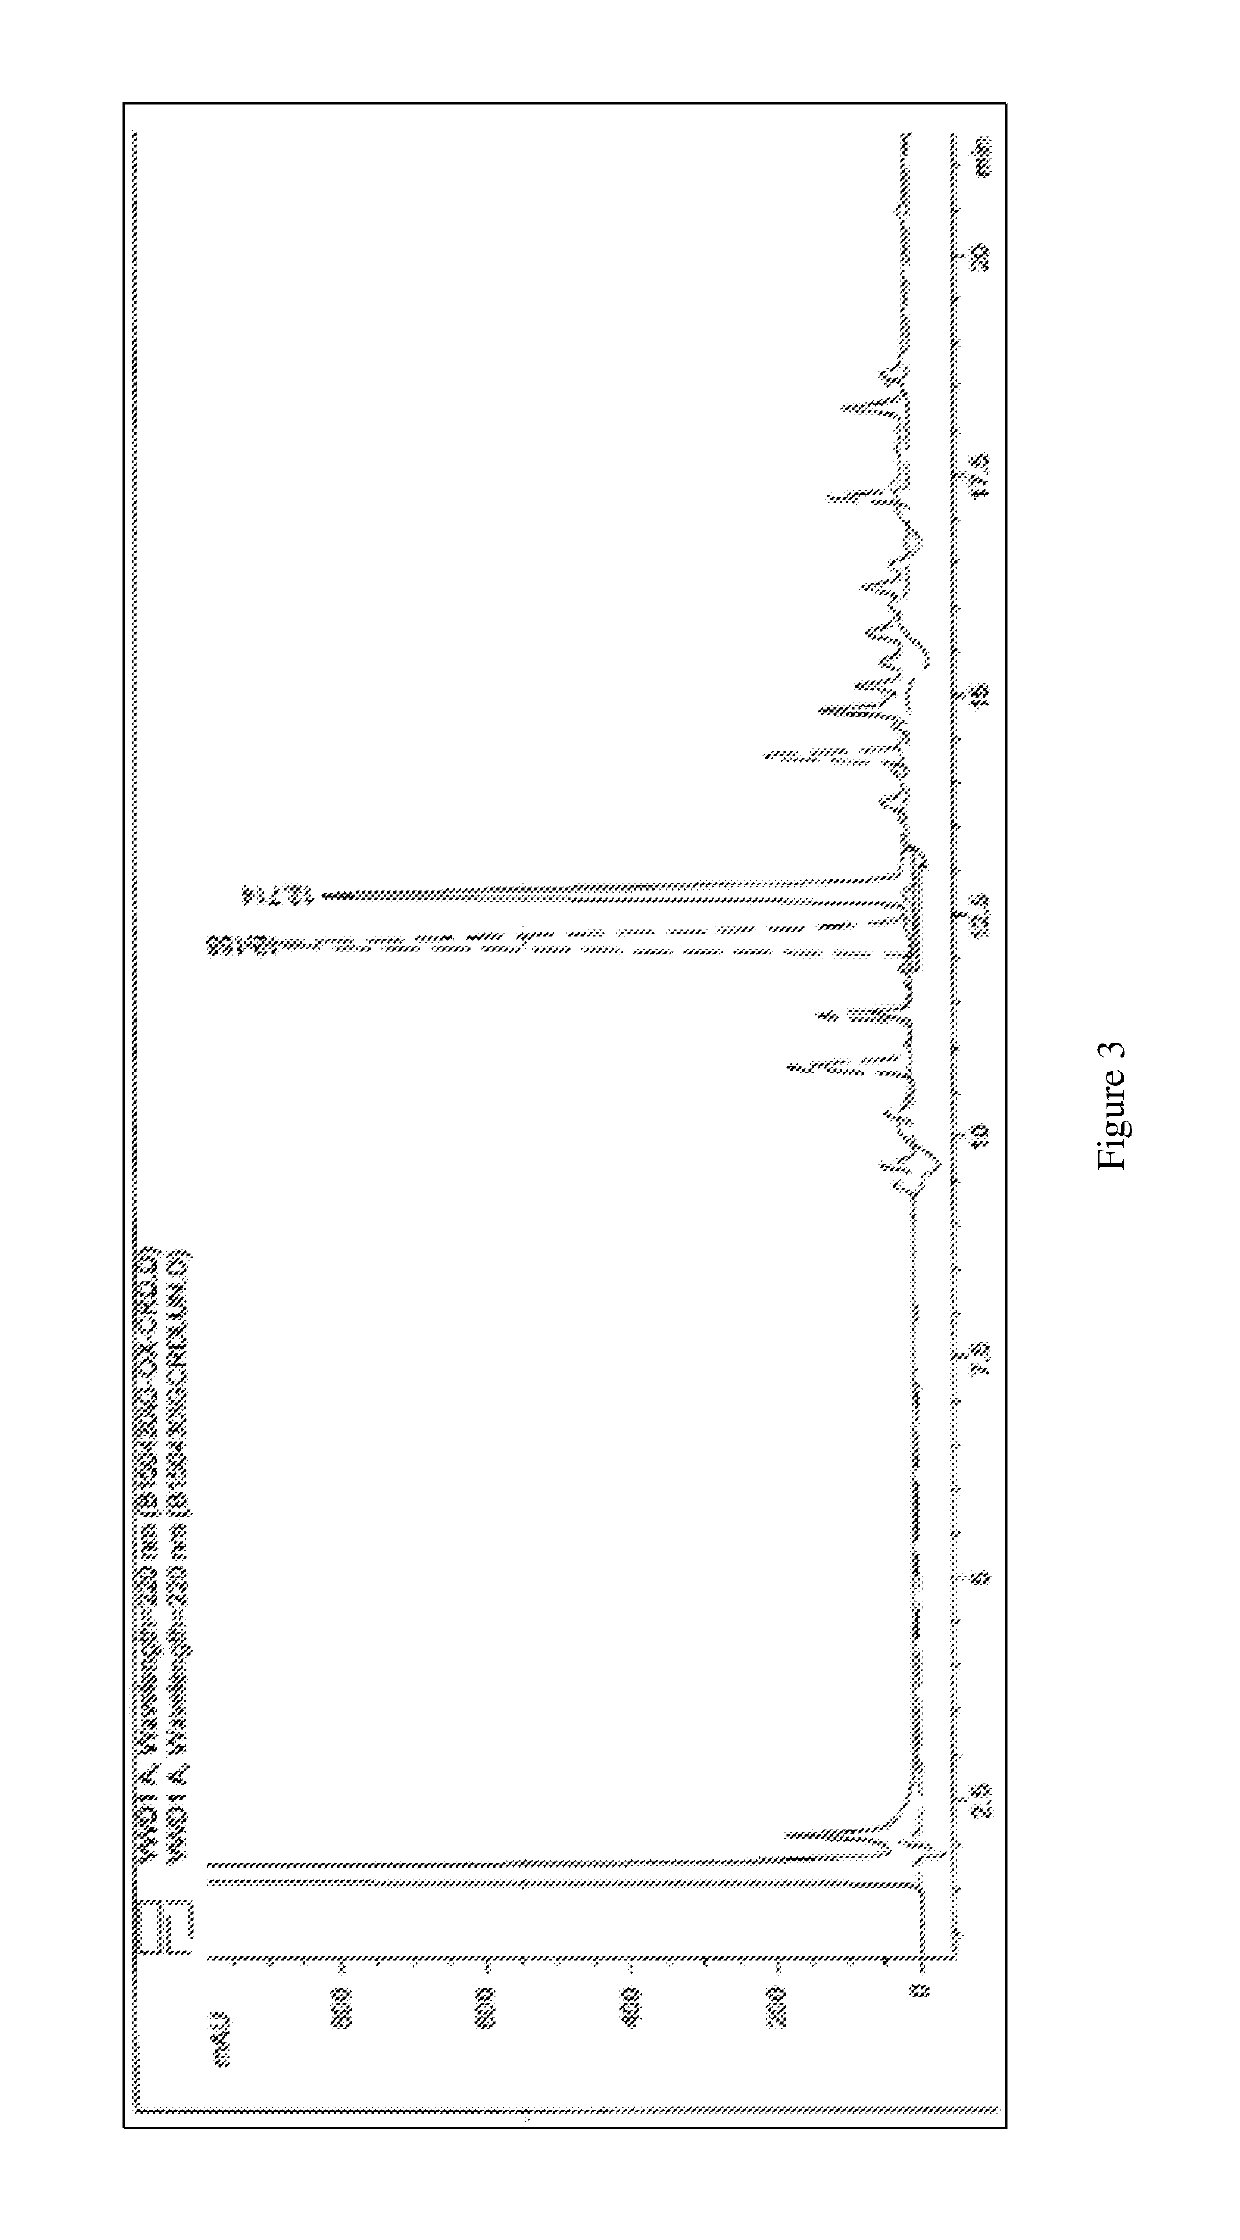 Methods for synthesizing α4β7 peptide antagonists